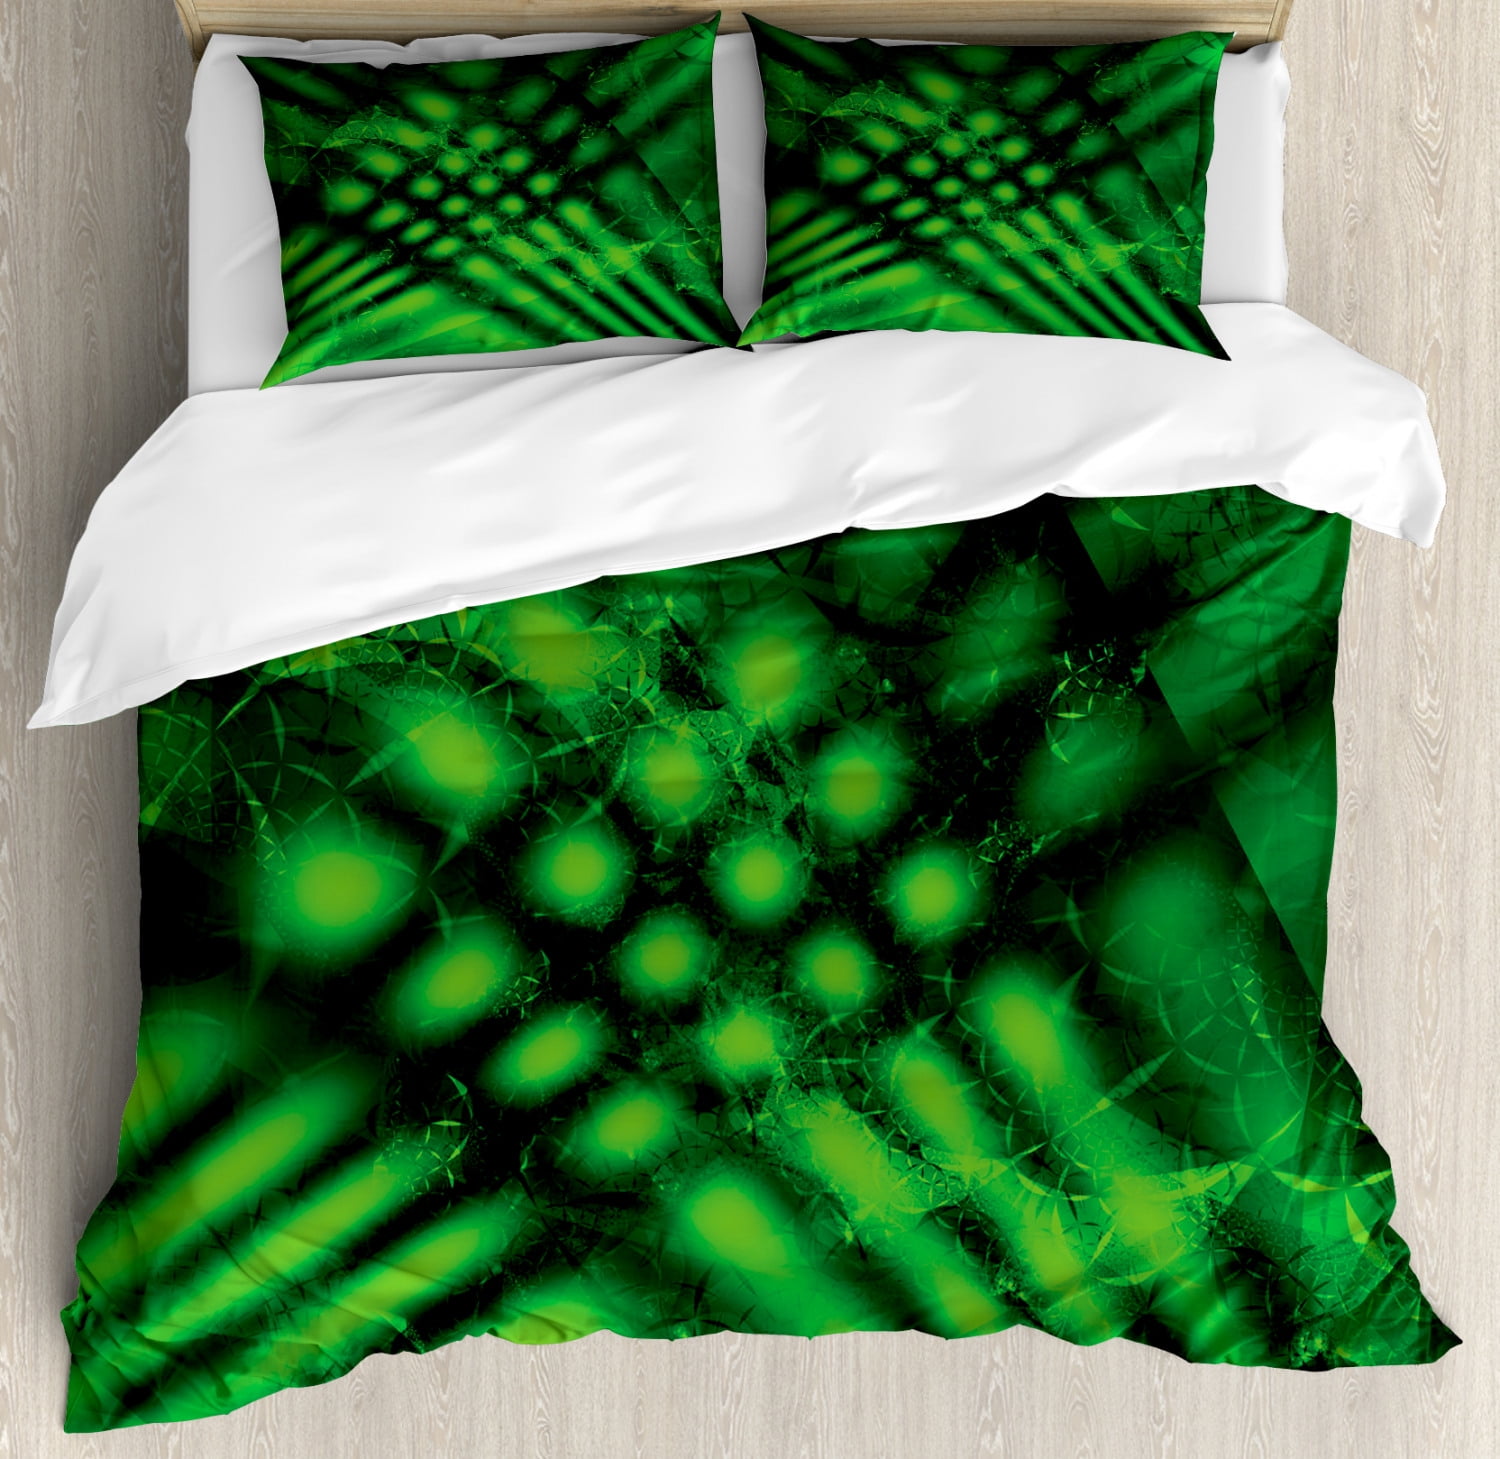 Lime Green Duvet Cover Set Psychedelic Abstract Blurry Shade